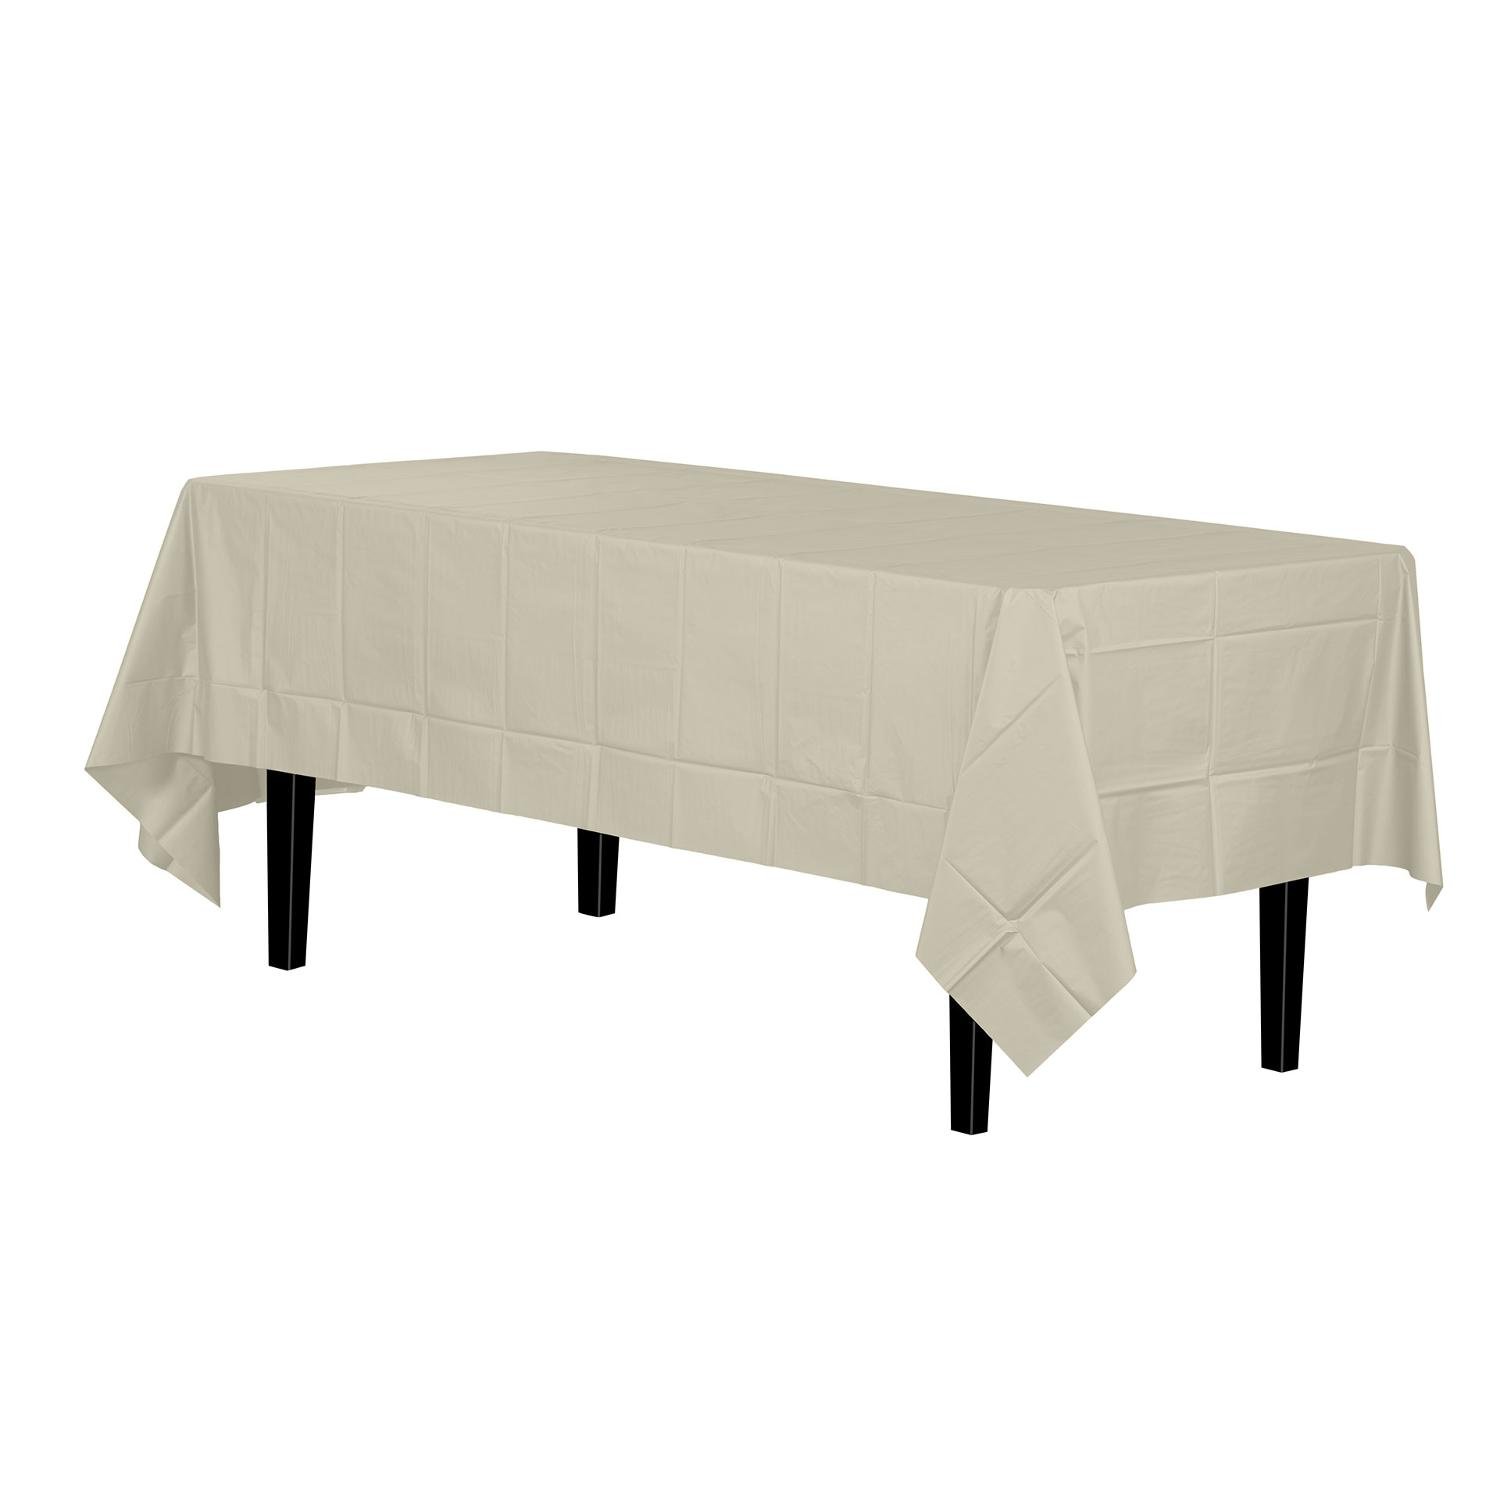 Premium Ivory Table Cover